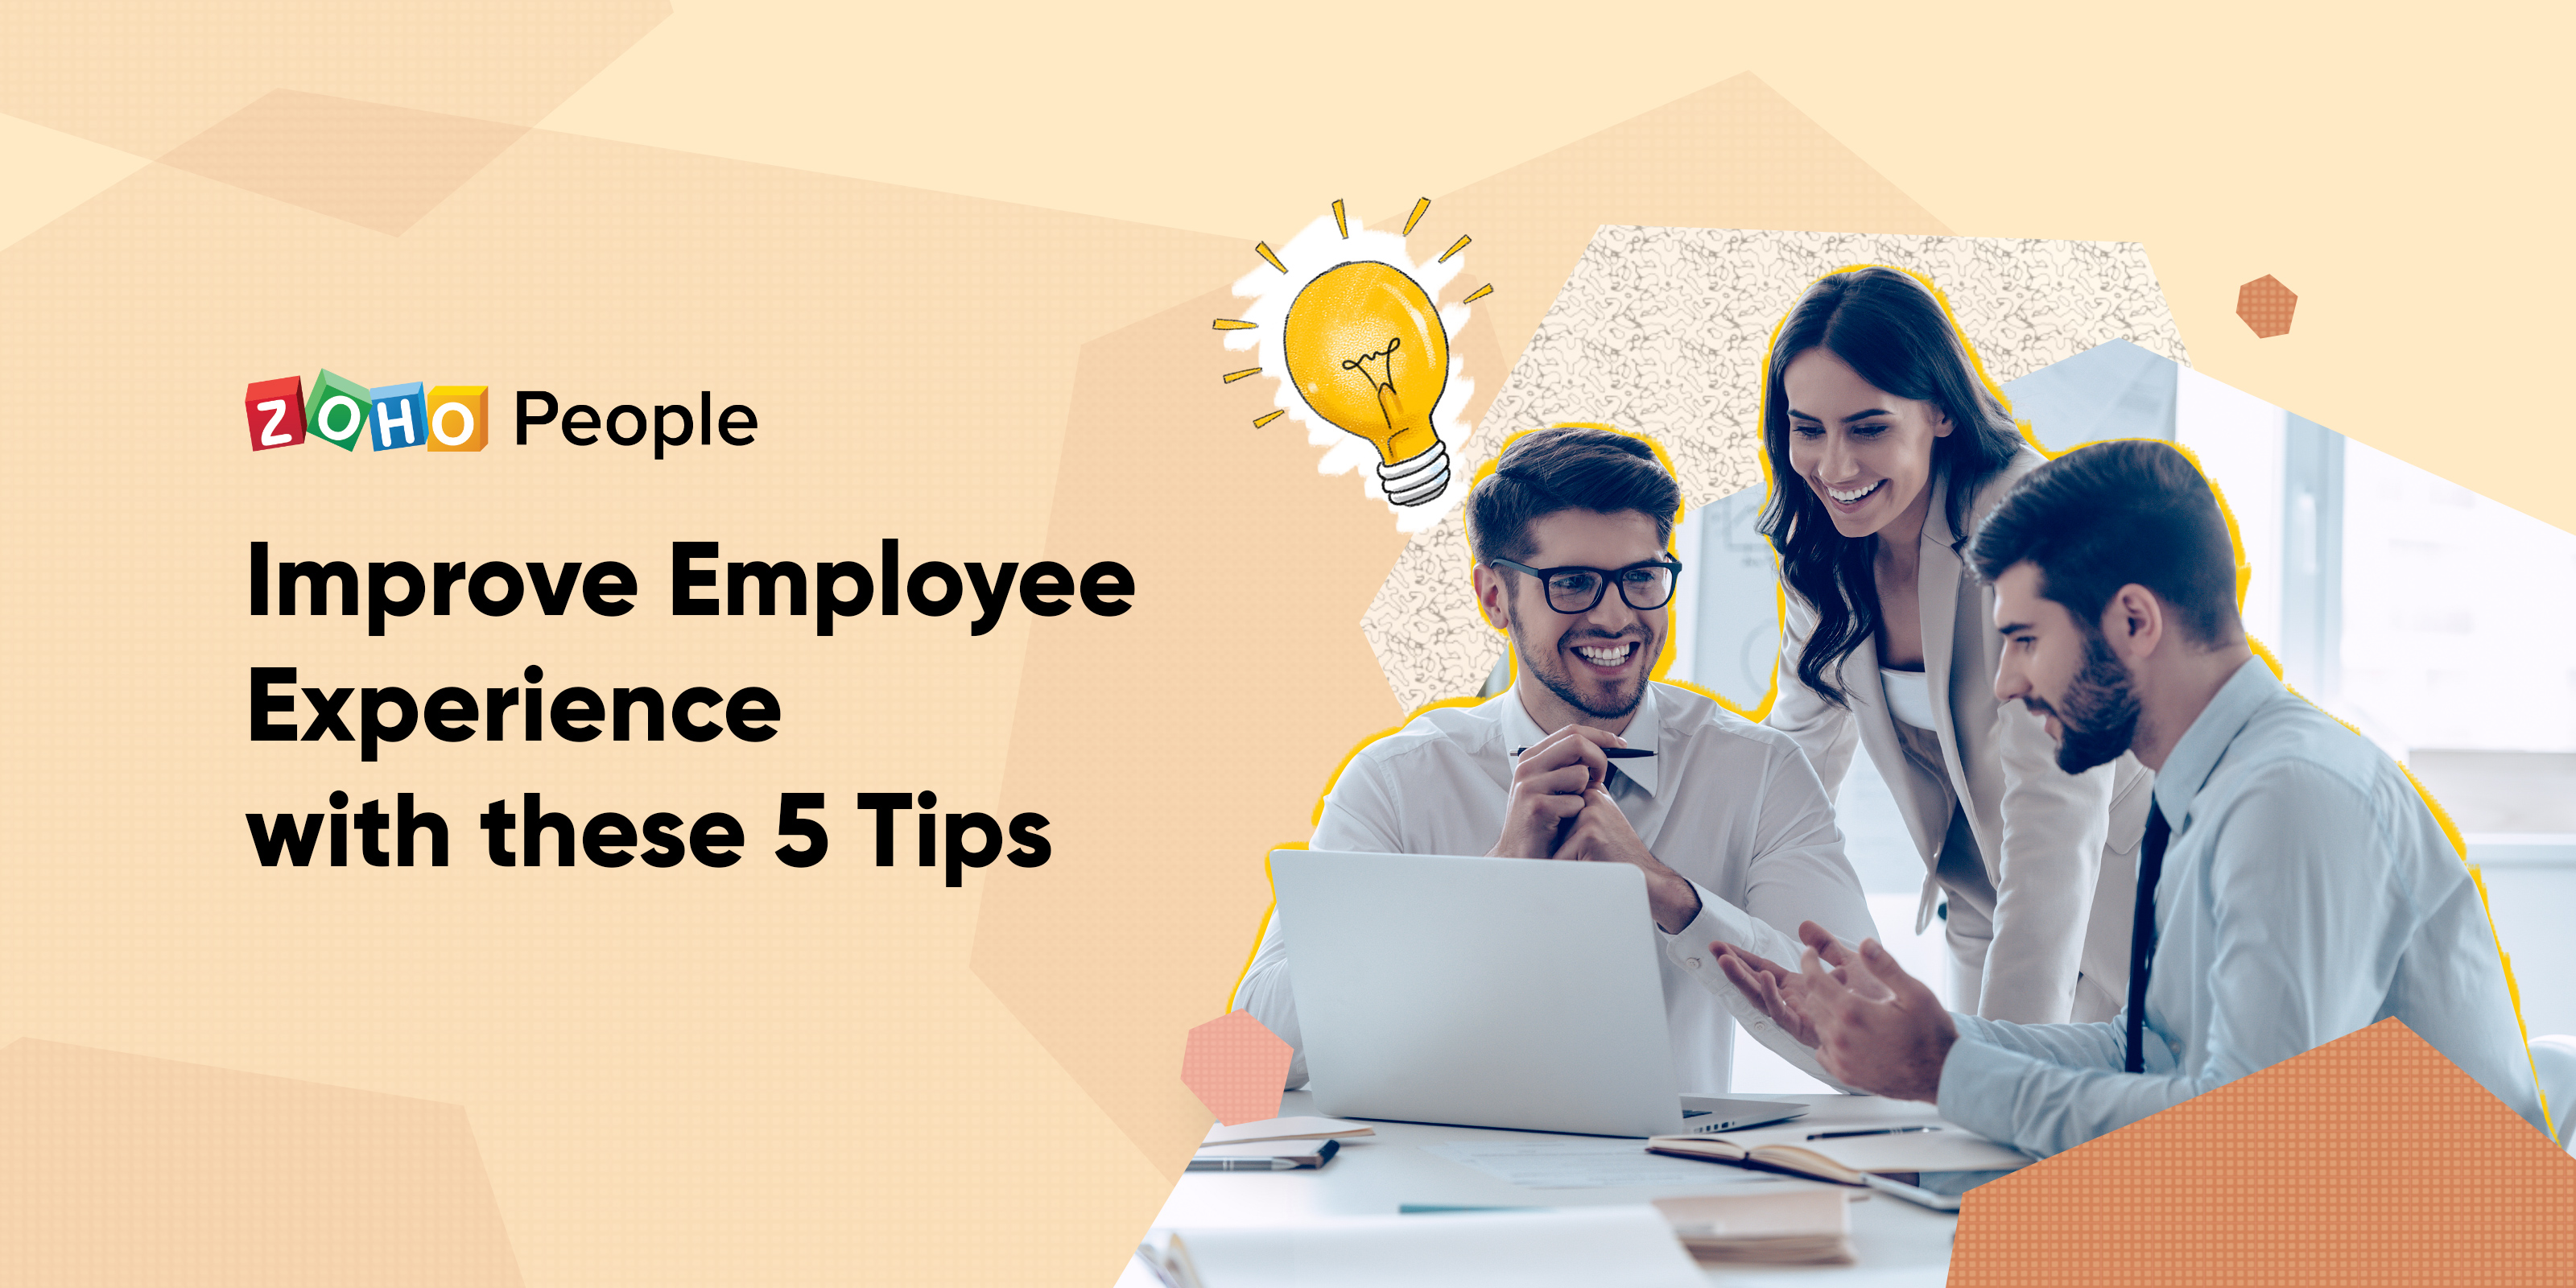 5 ways to enhance employee experience in your organization